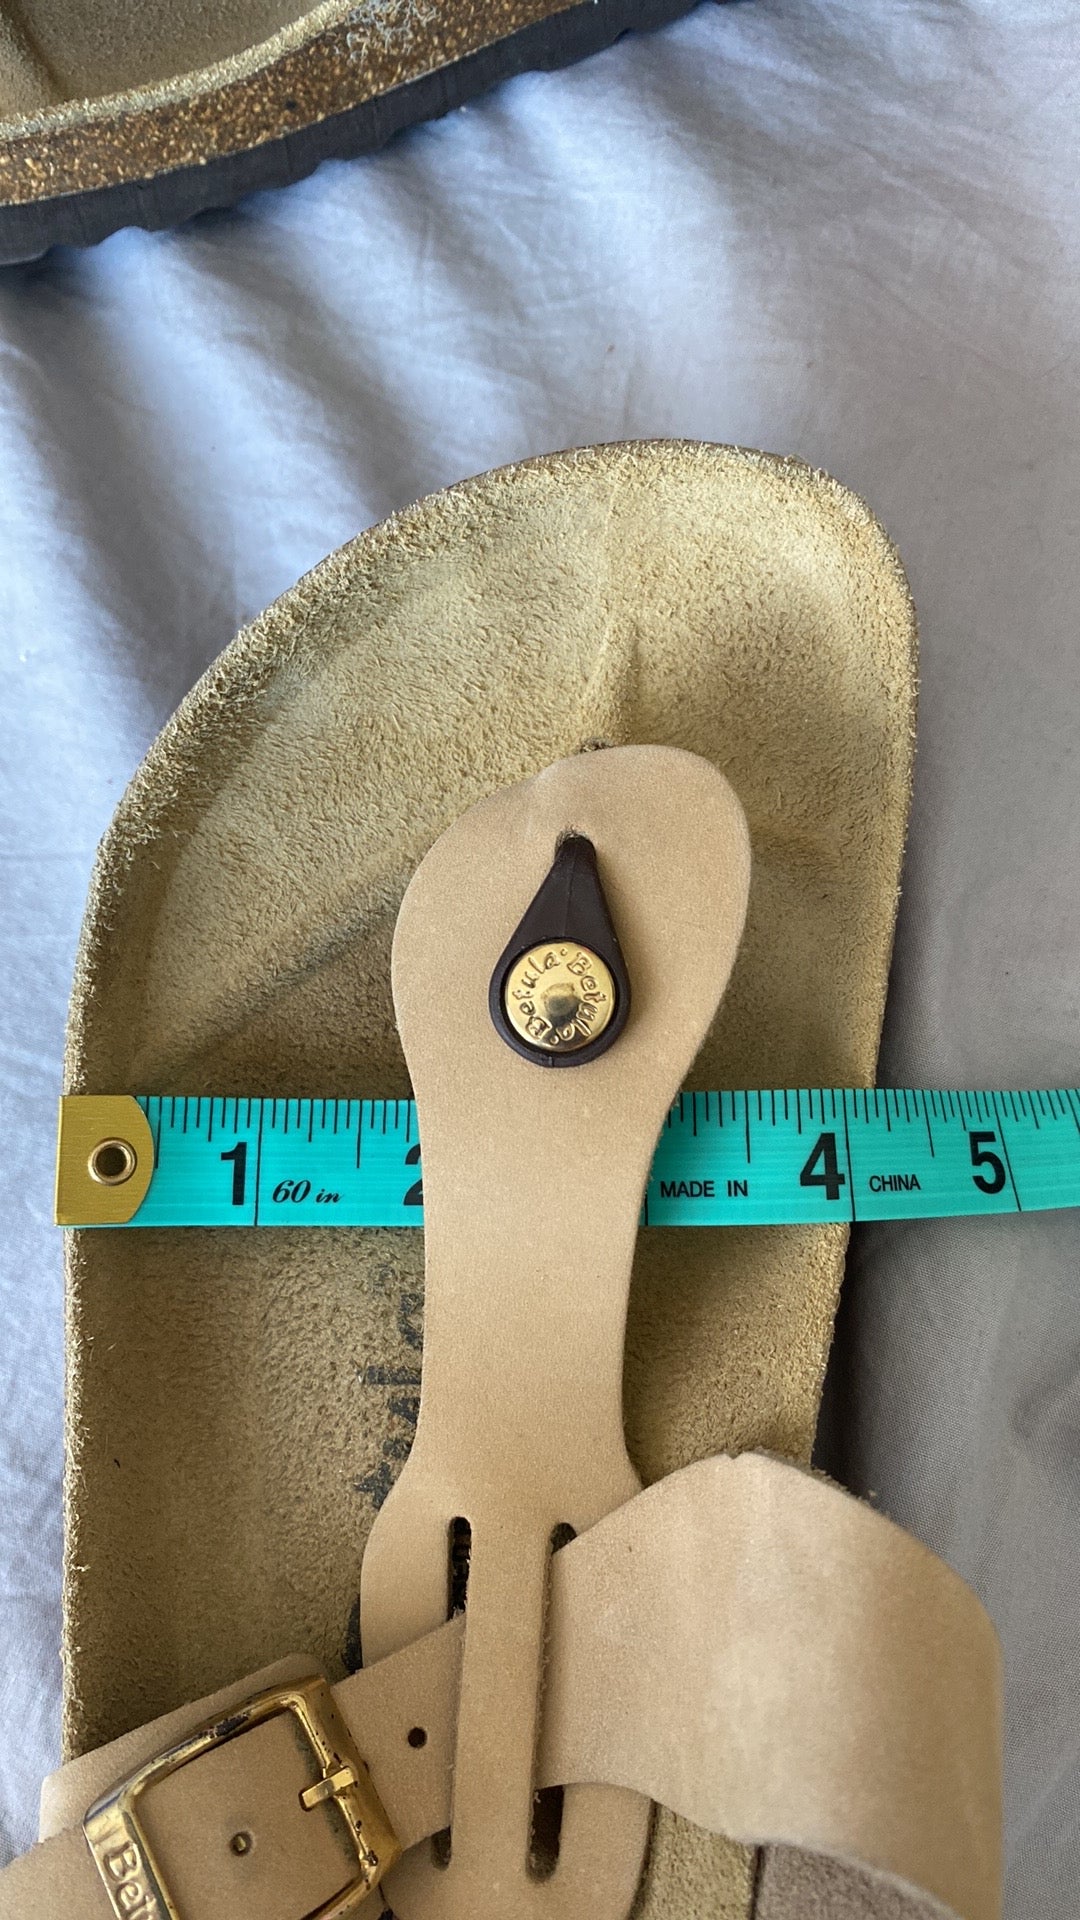 Betula Birkenstock Suede Leather Thong Sandals Size 10